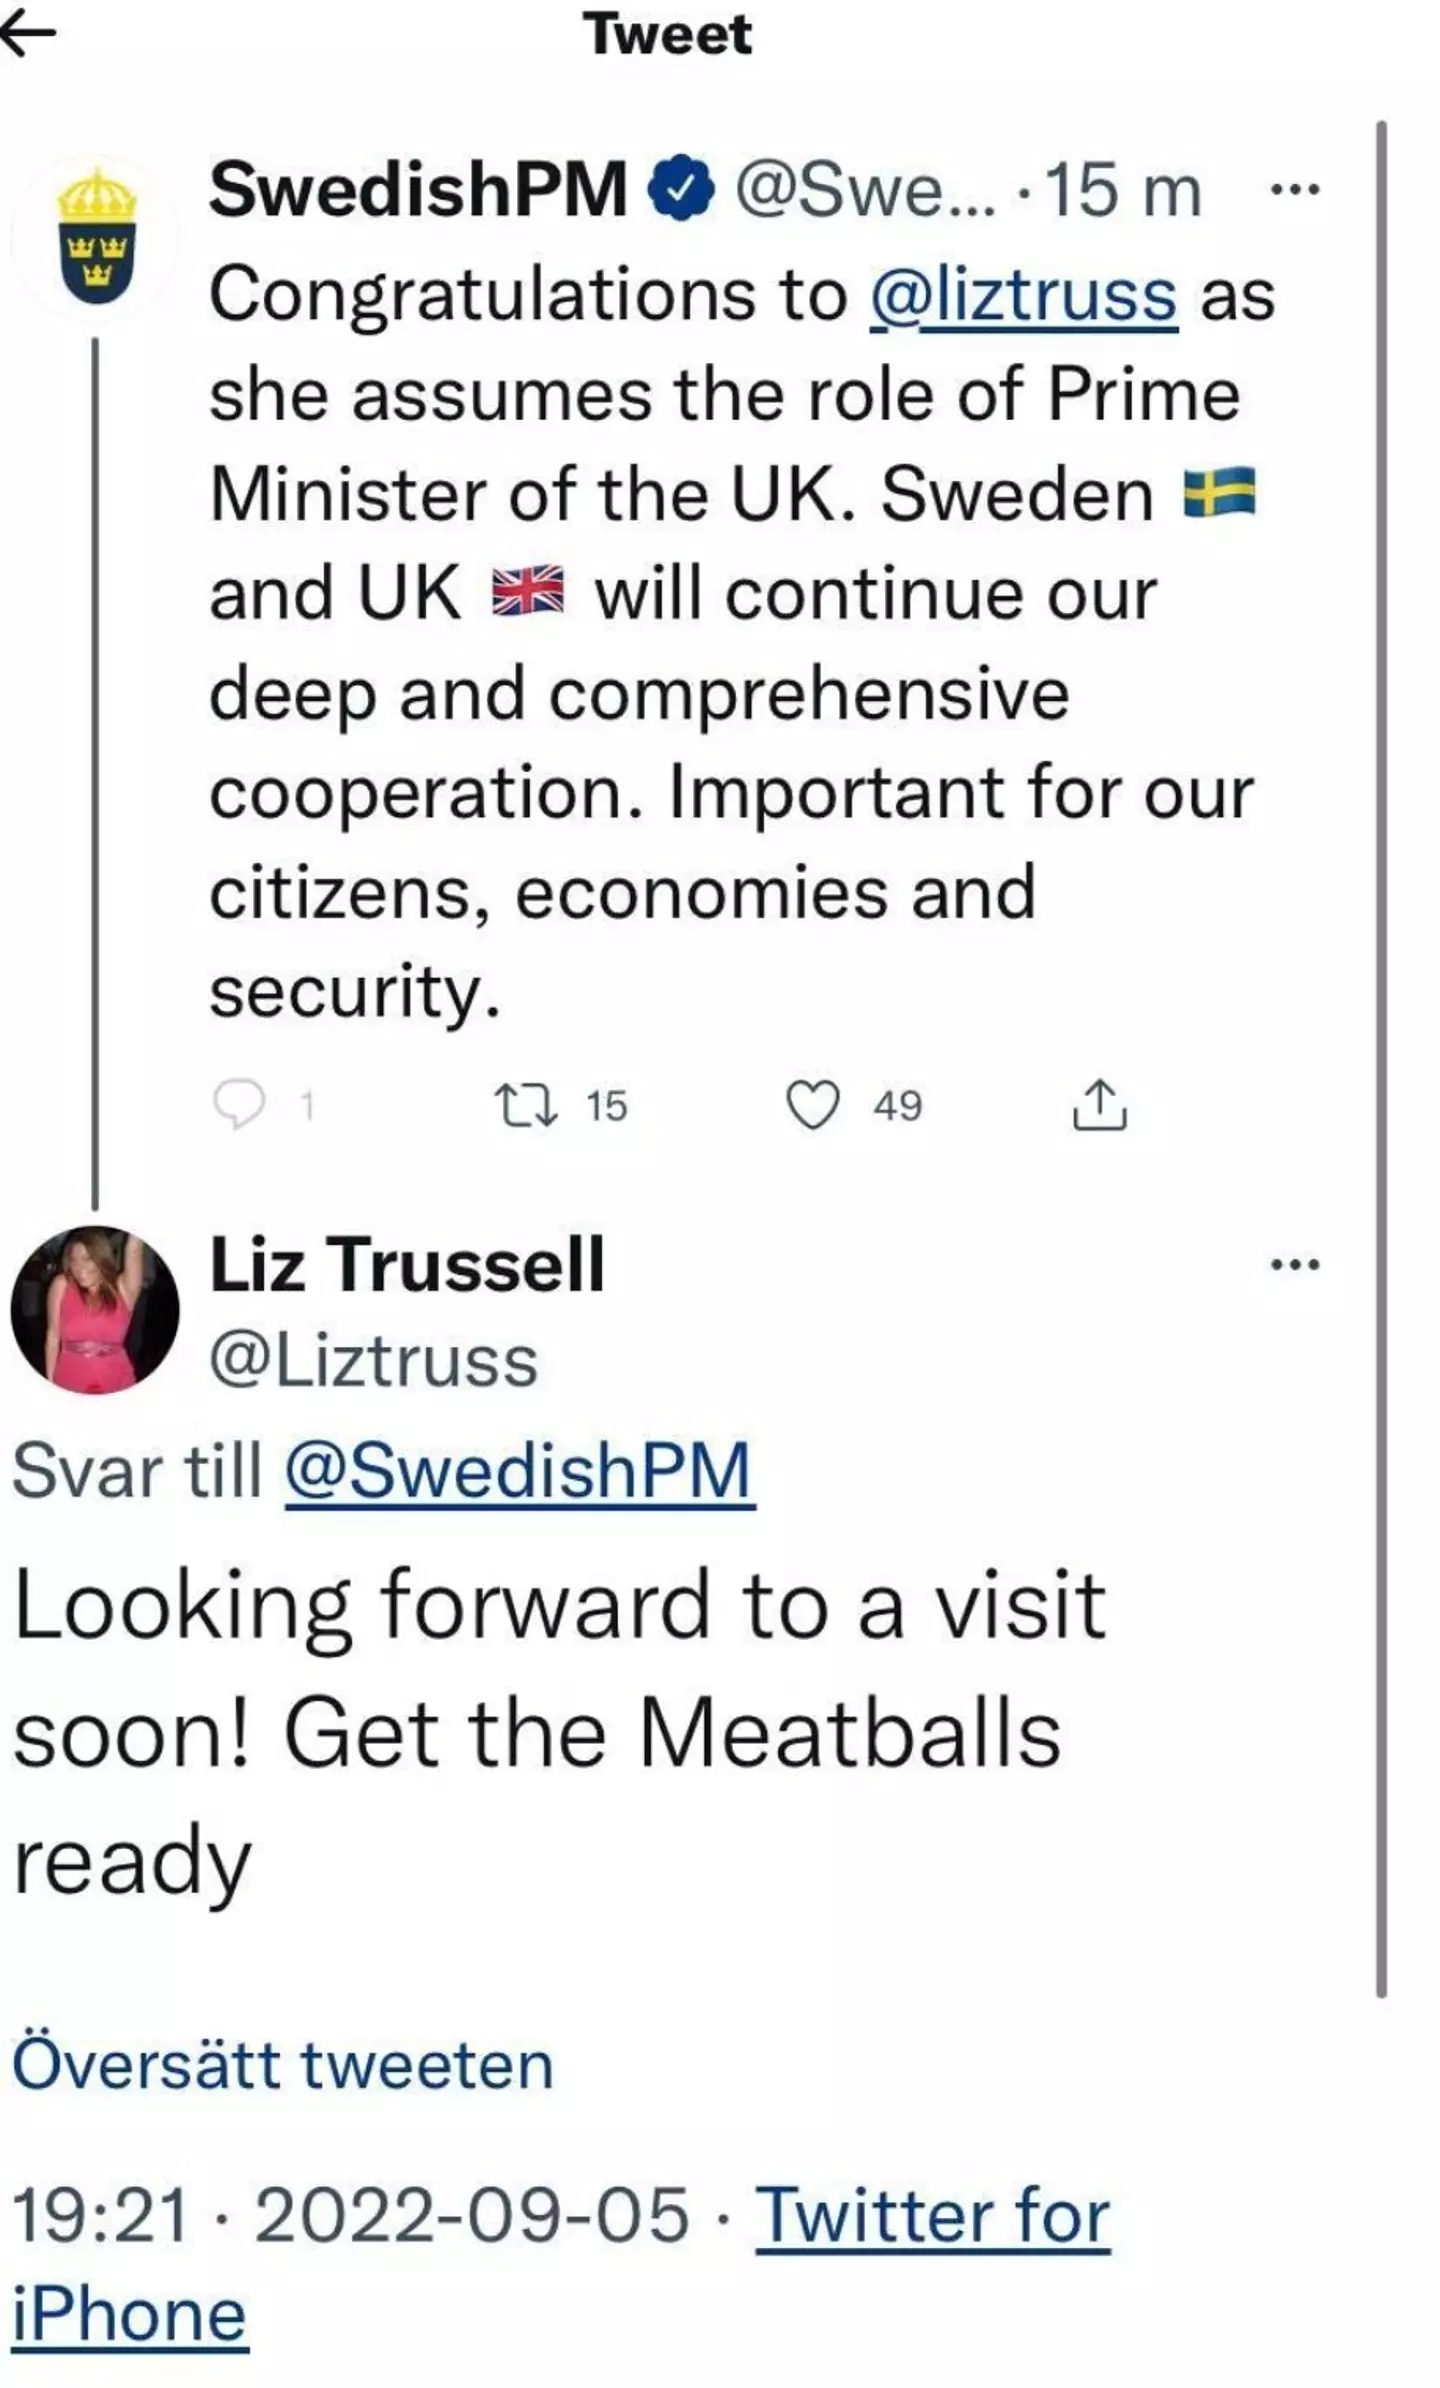 Andersson mentioned the wrong Liz Truss, tagging the account @LizTruss instead of @trussliz.